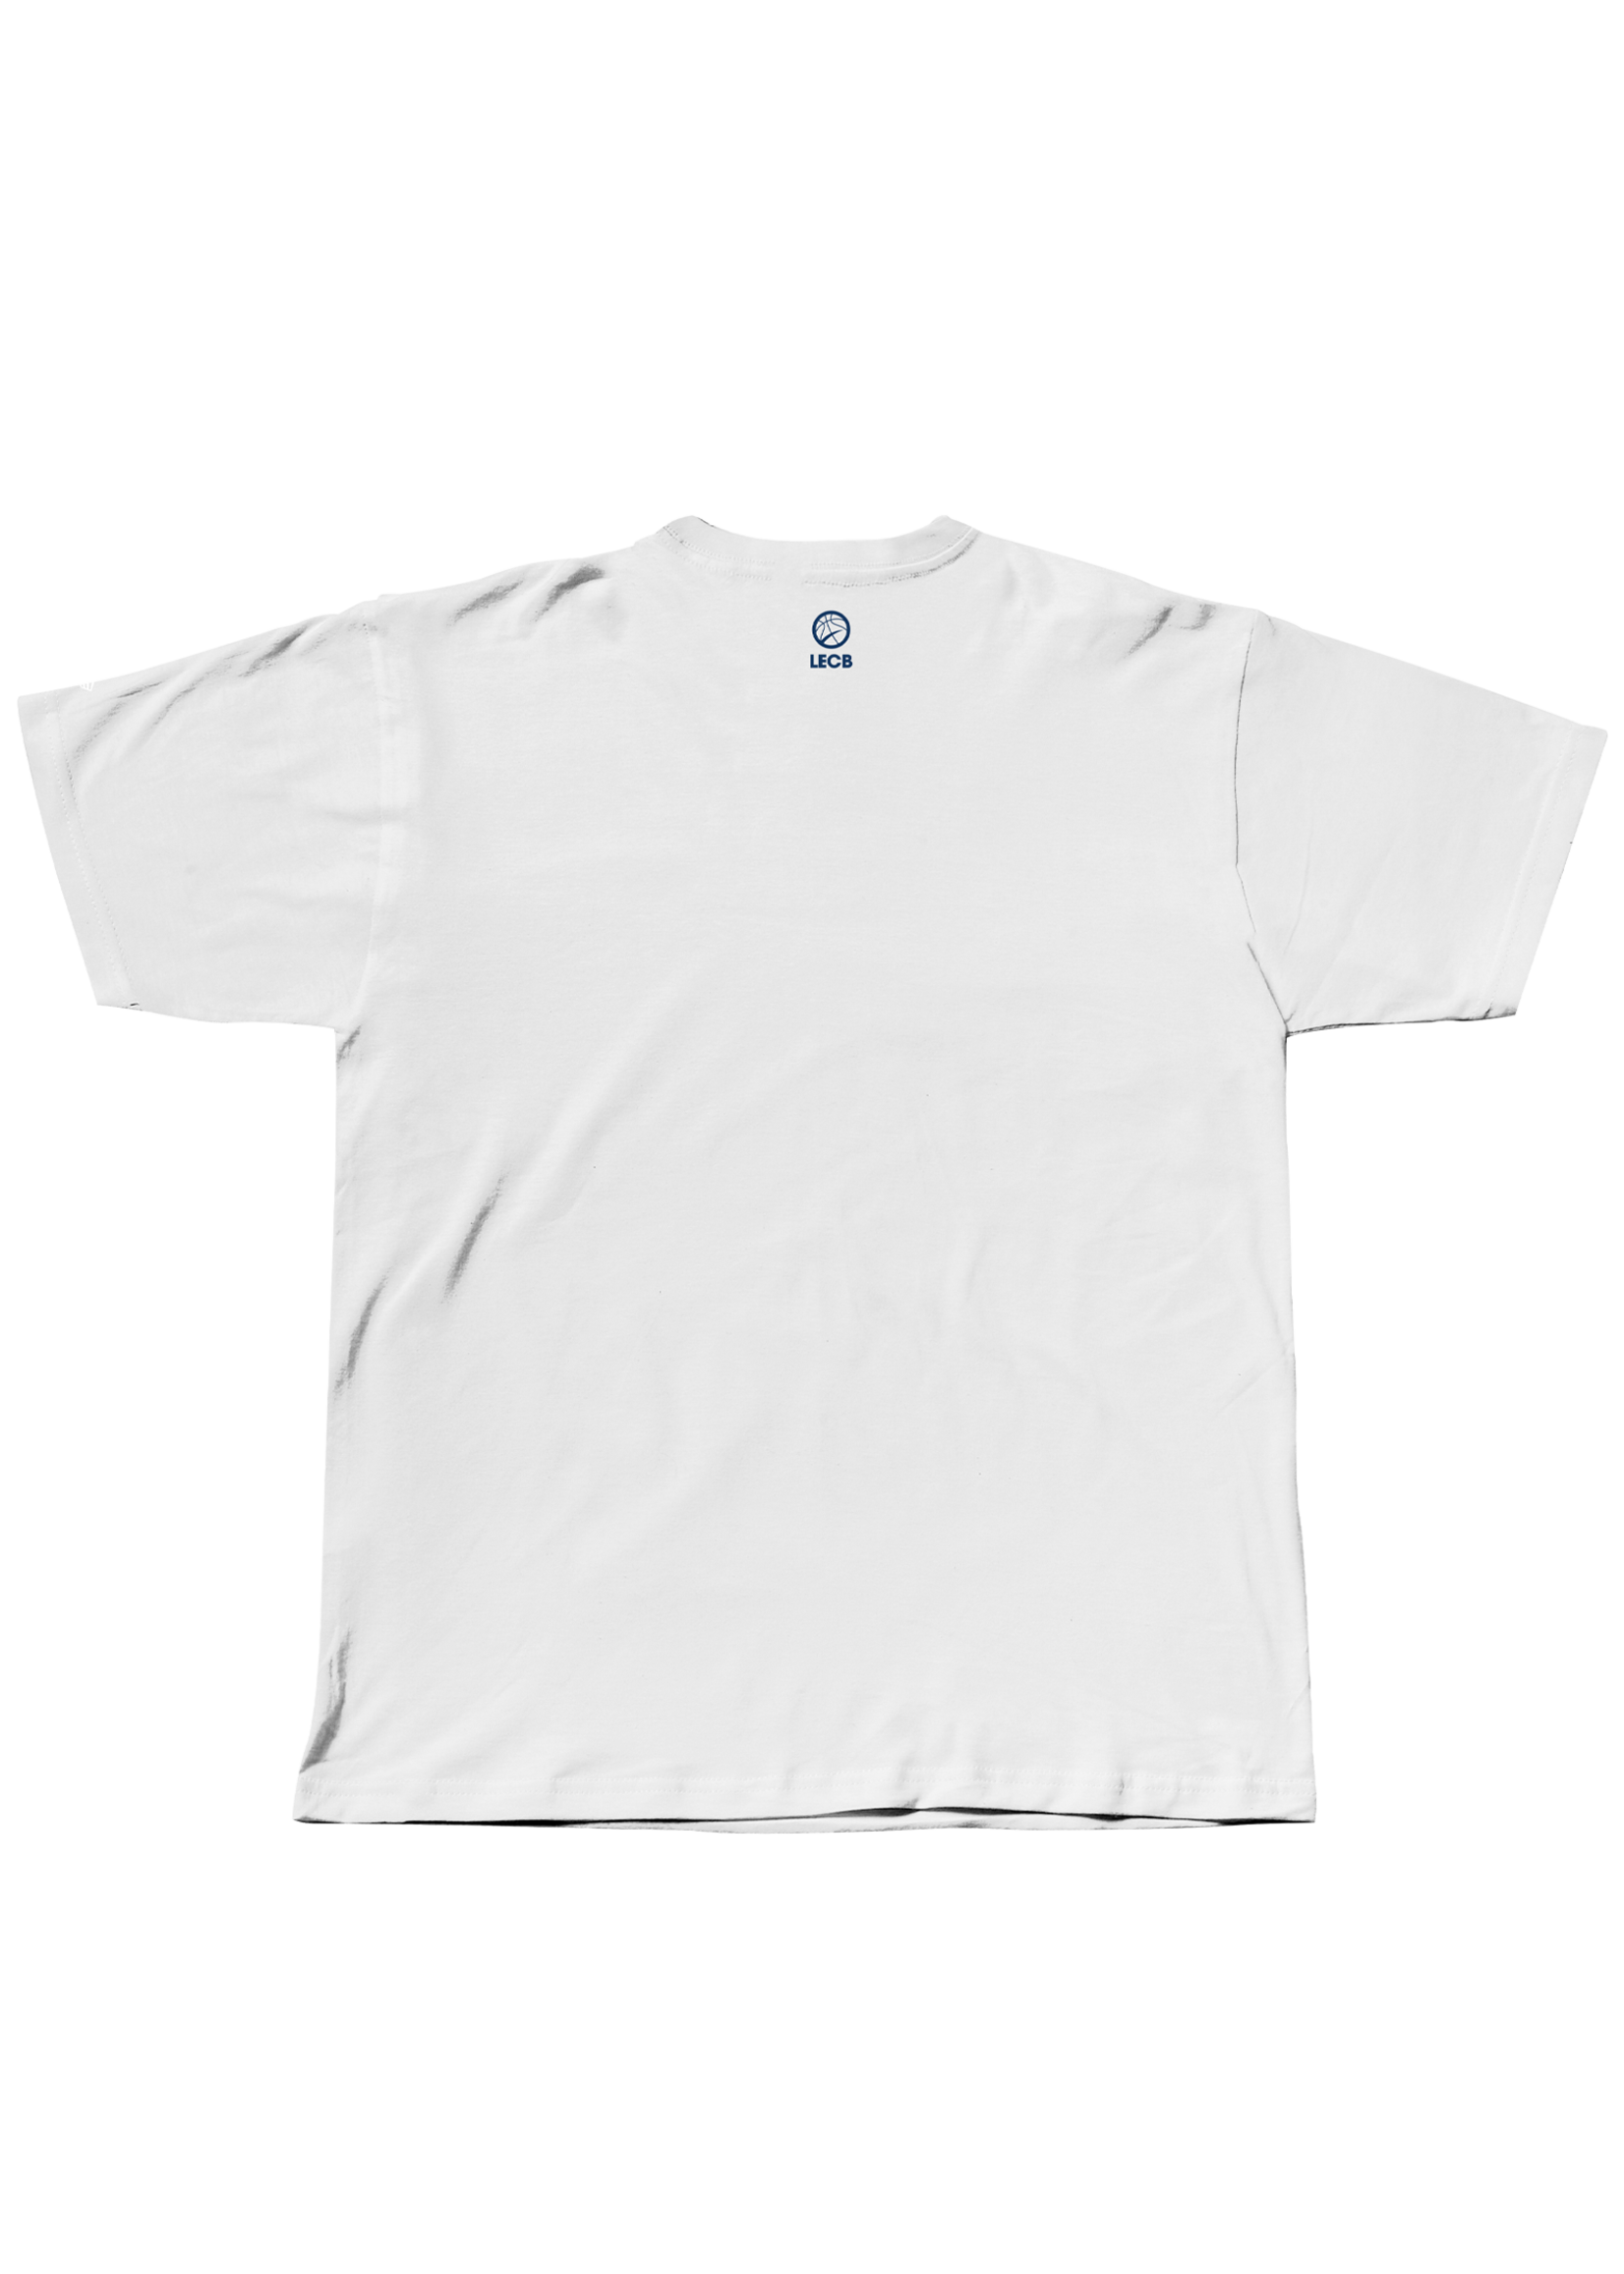 Montréal Alliance Bagel Tee Youth - White